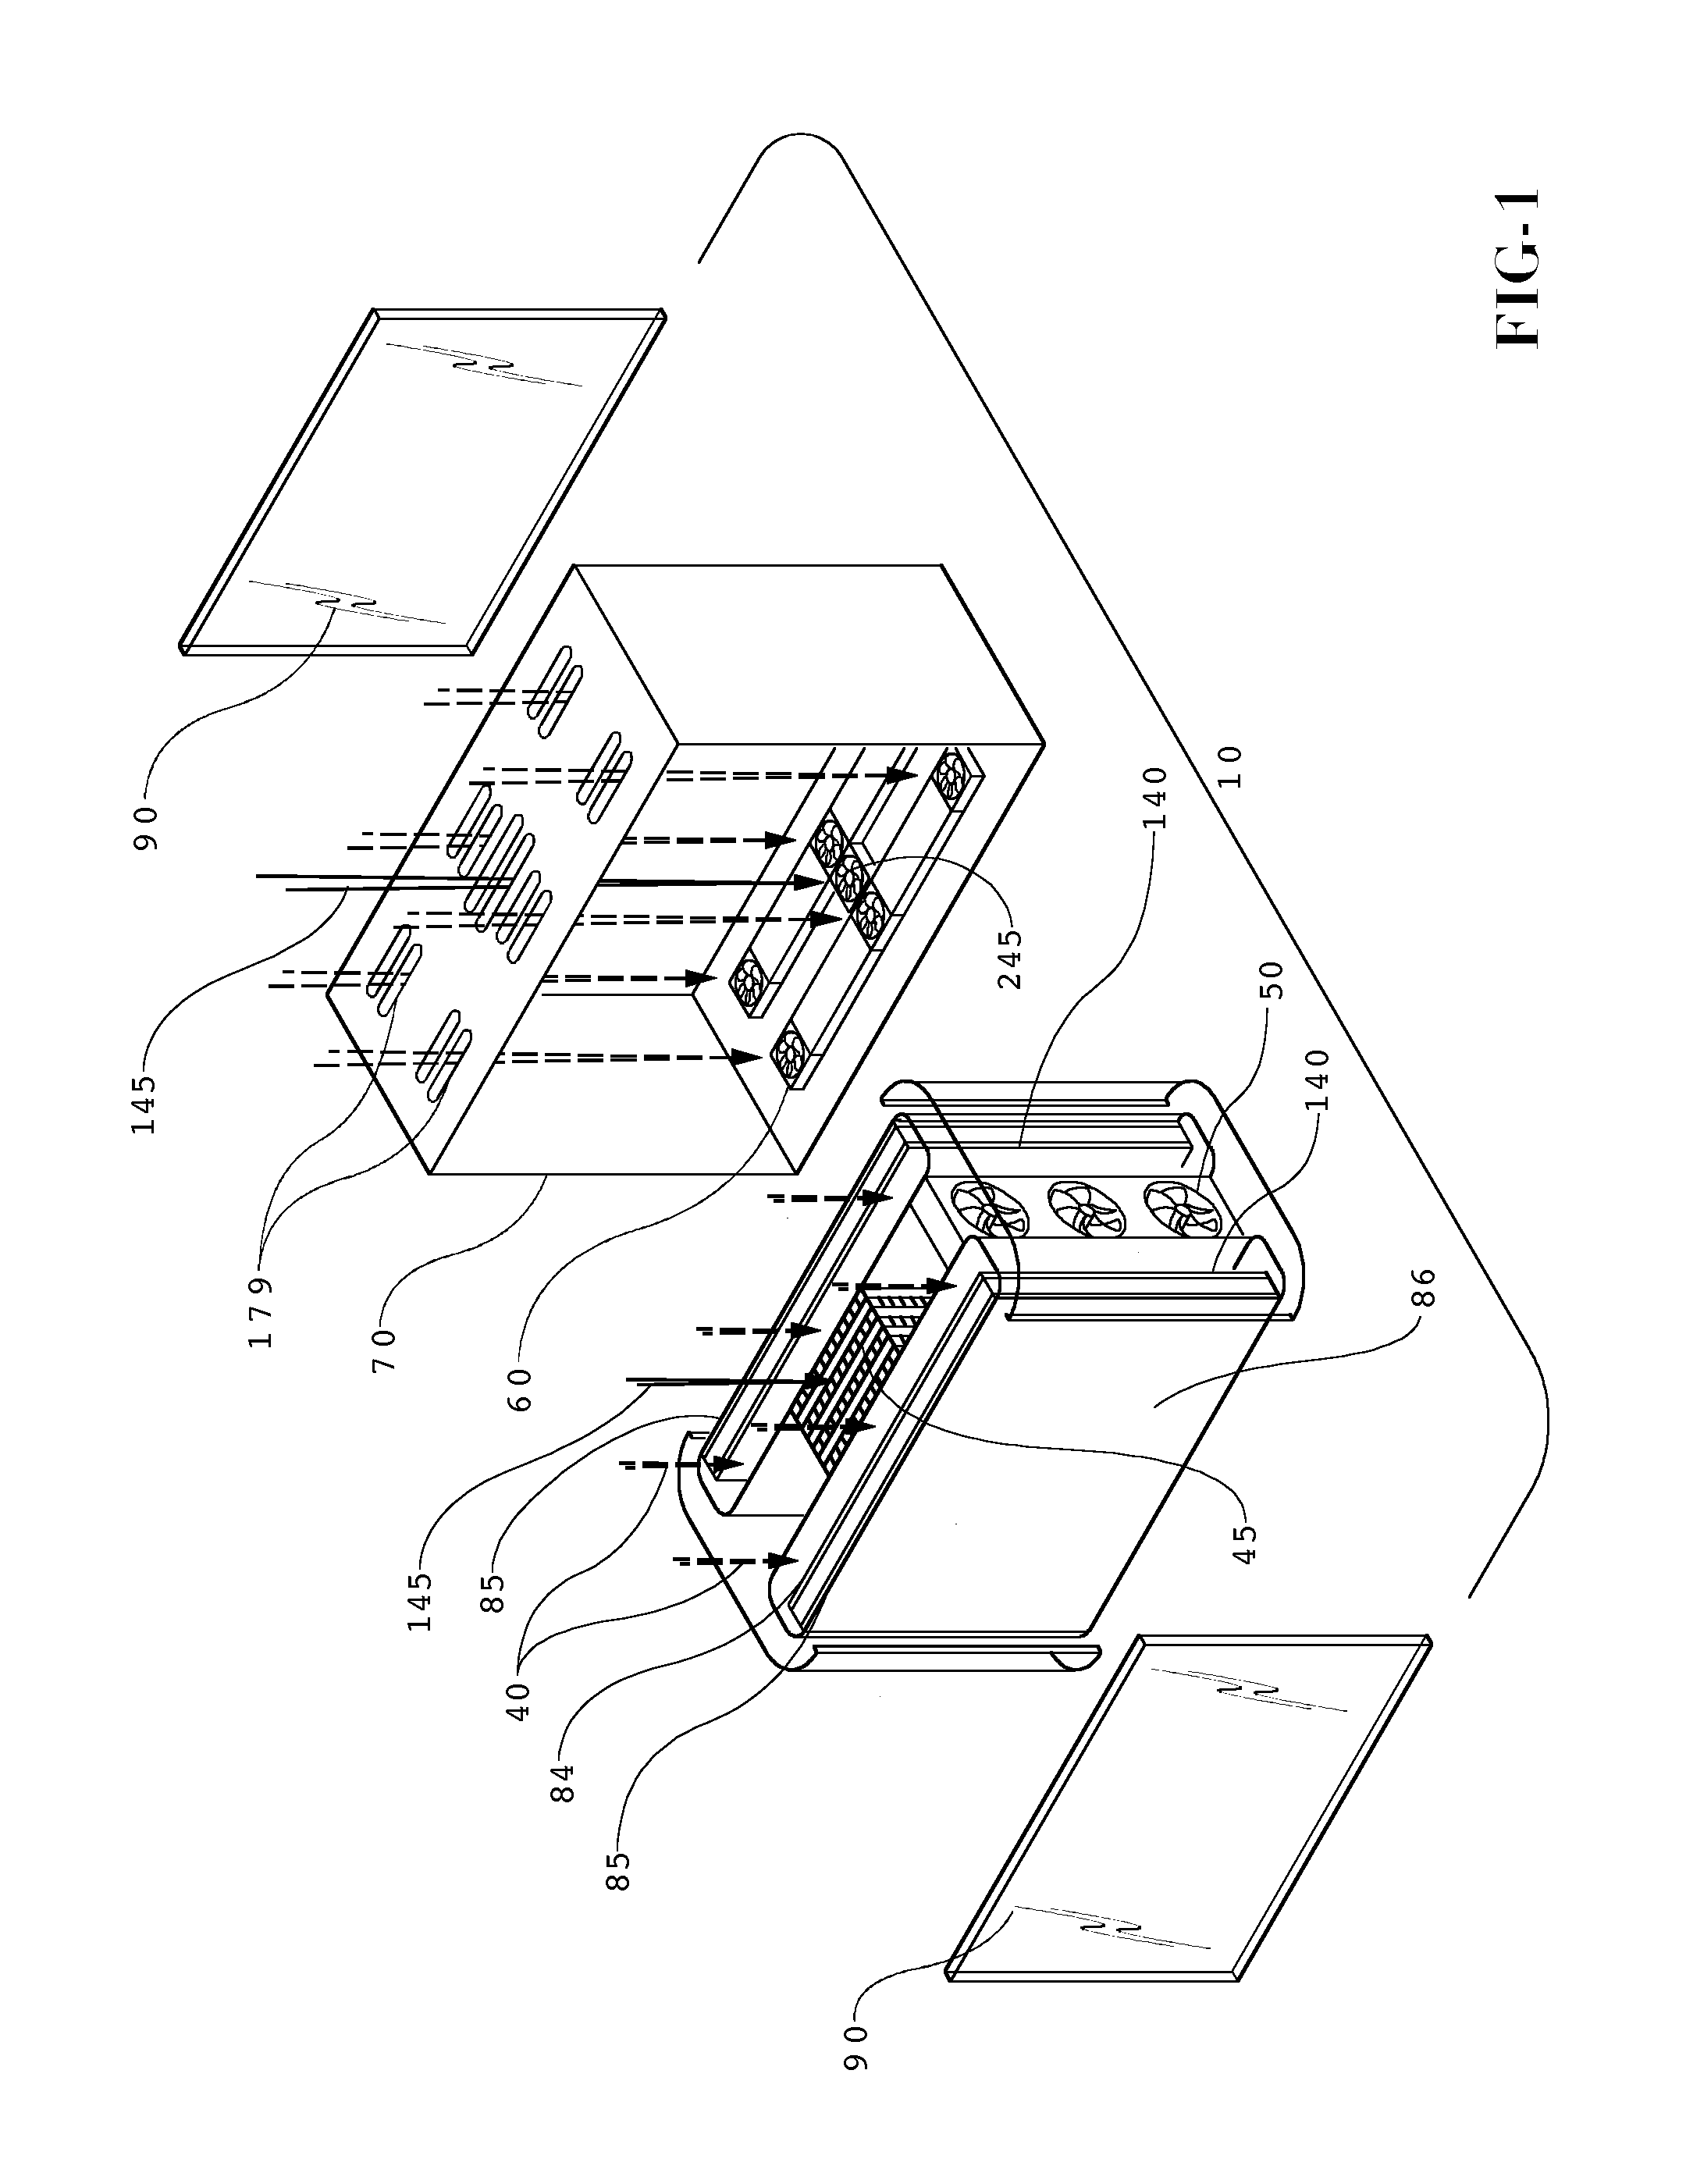 Heat Exchanger for Back to Back Electronic Displays